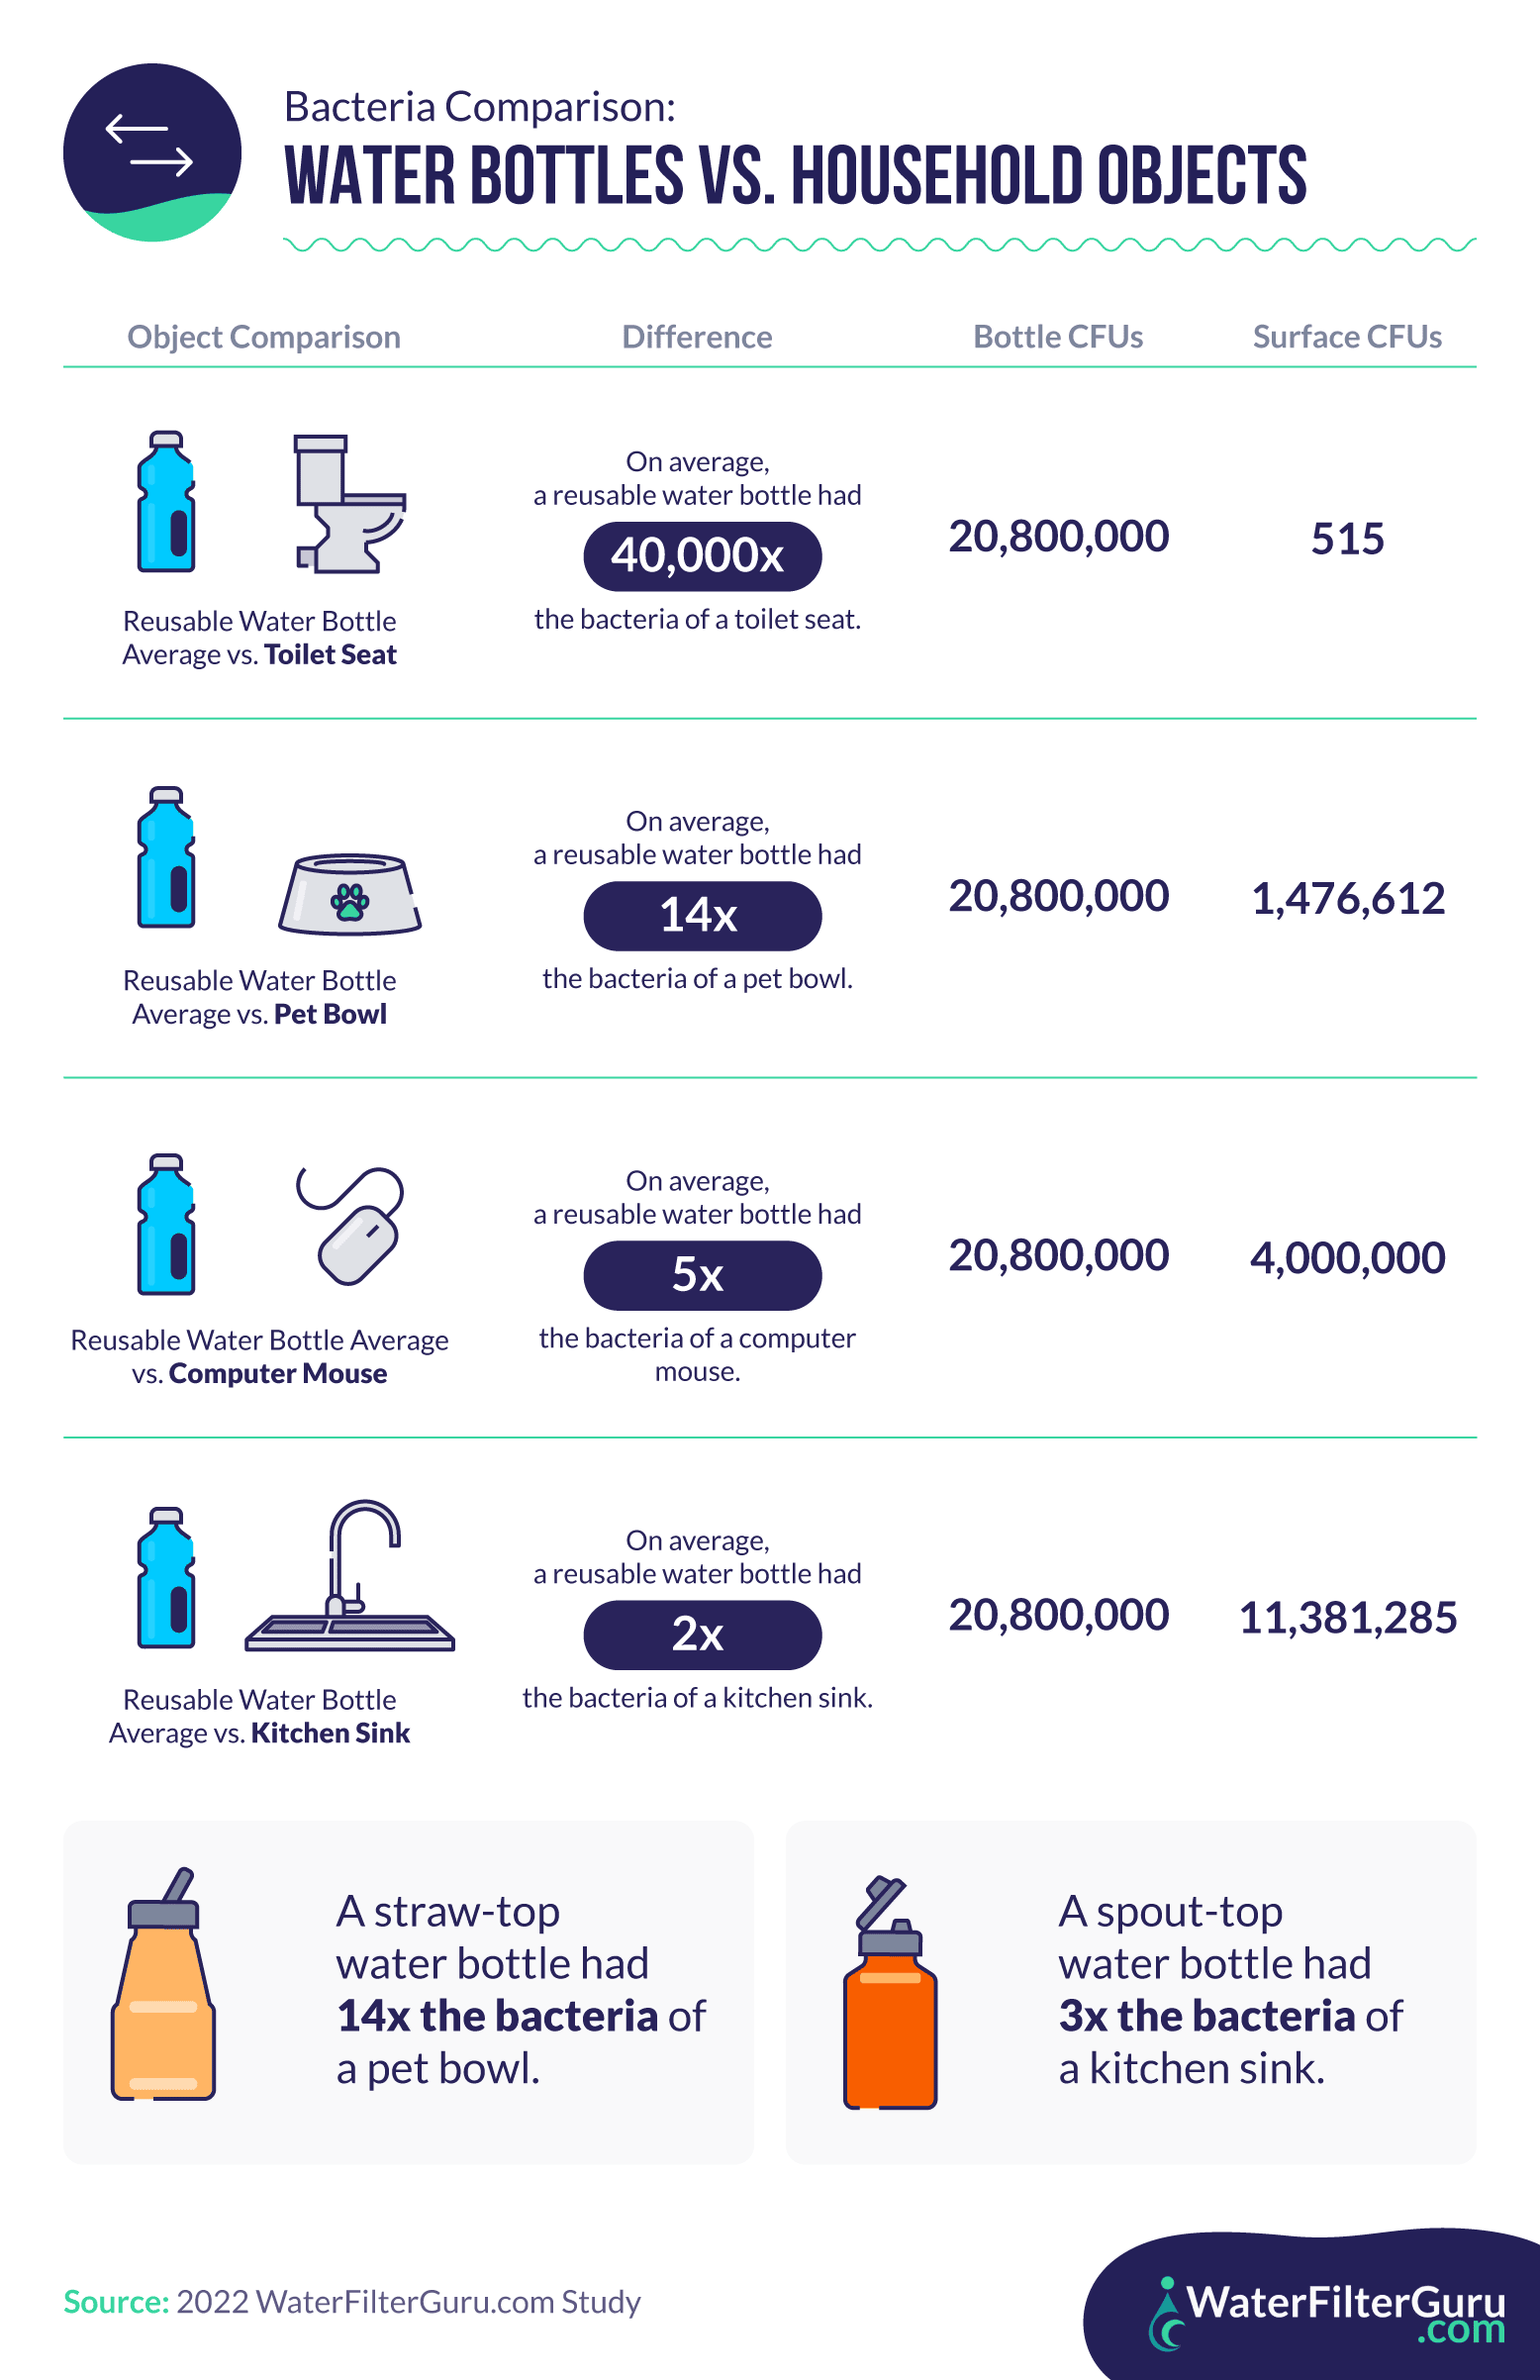 https://thesouthfirst.com/wp-content/uploads/2023/03/water-bottles-and-household-object-comparisons.png